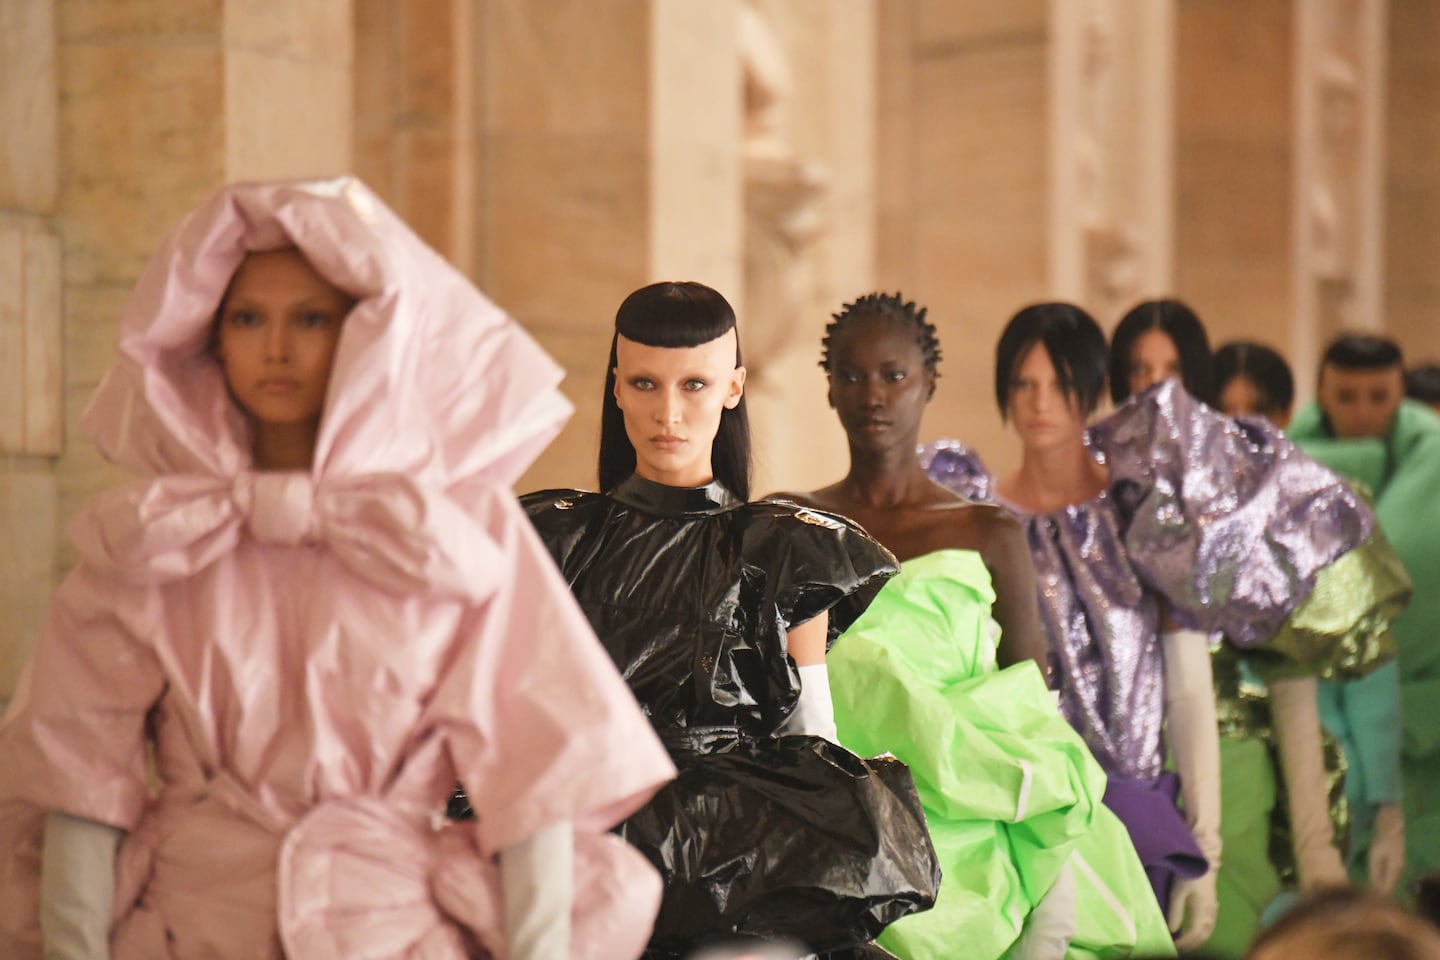 Marc Jacobs showed his latest runway collection at the New York Public Library.